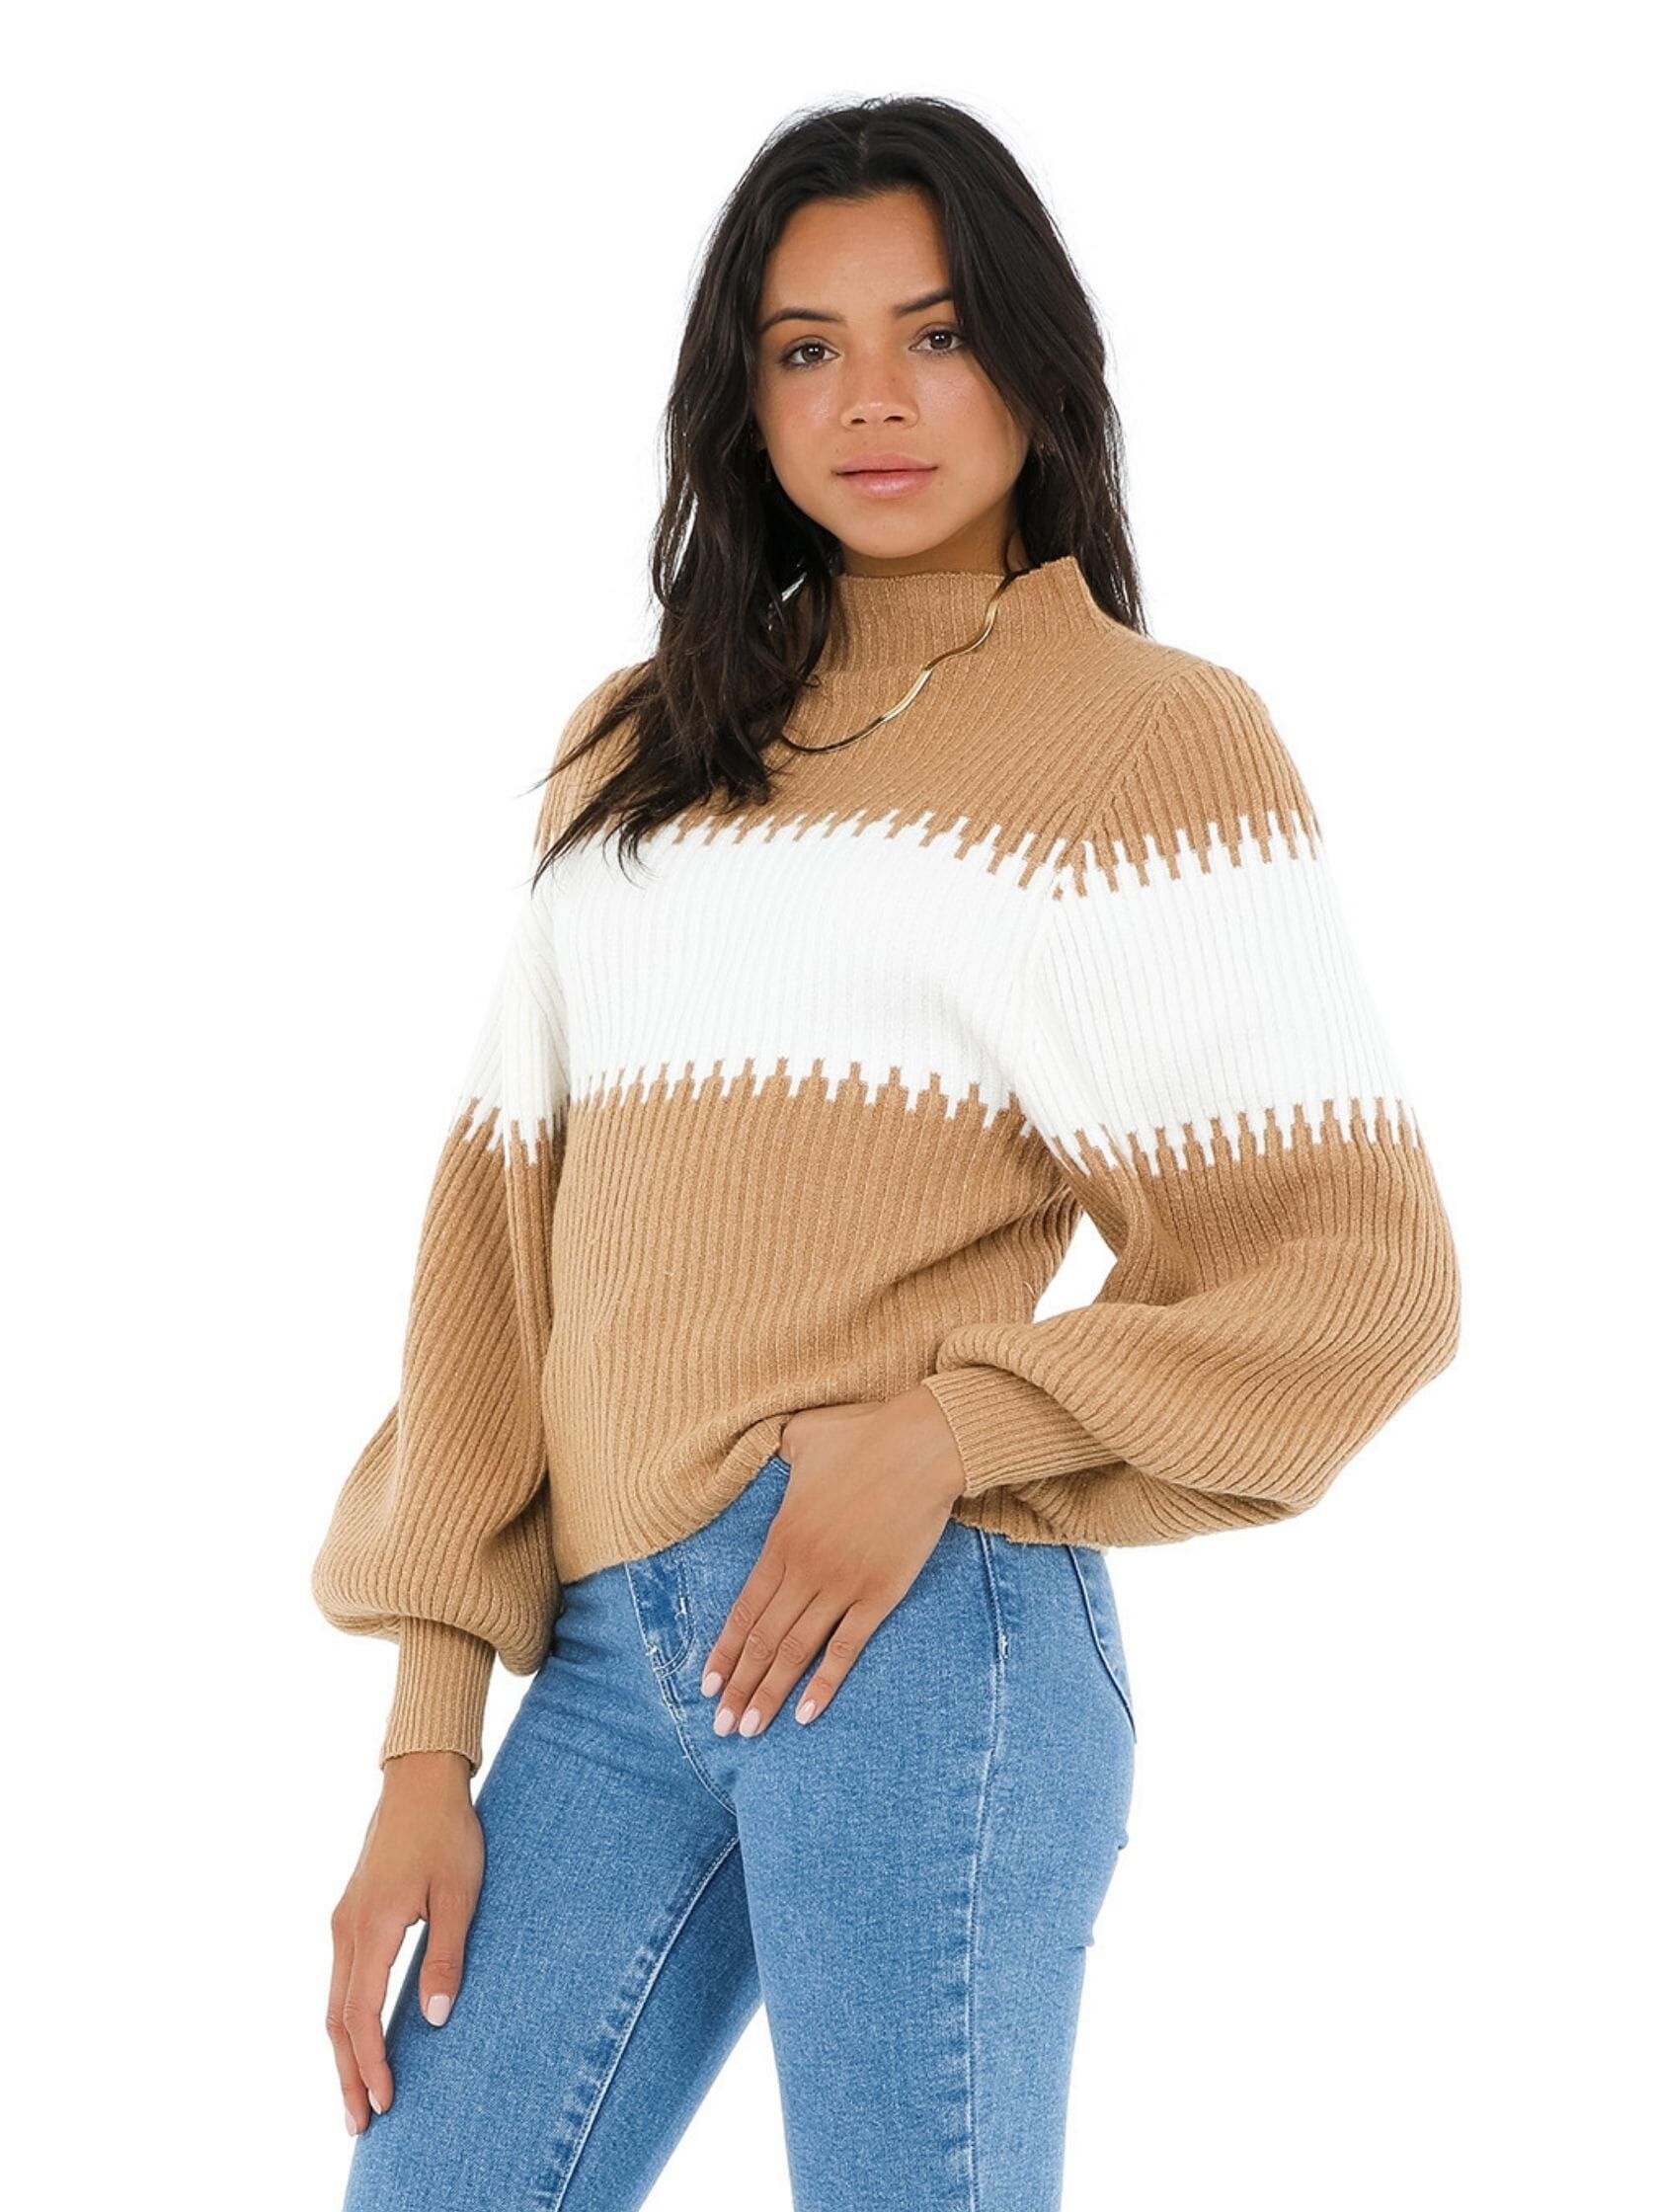 French Connection Sofia Knits Balloon Sleeve Jumper in Camel/White